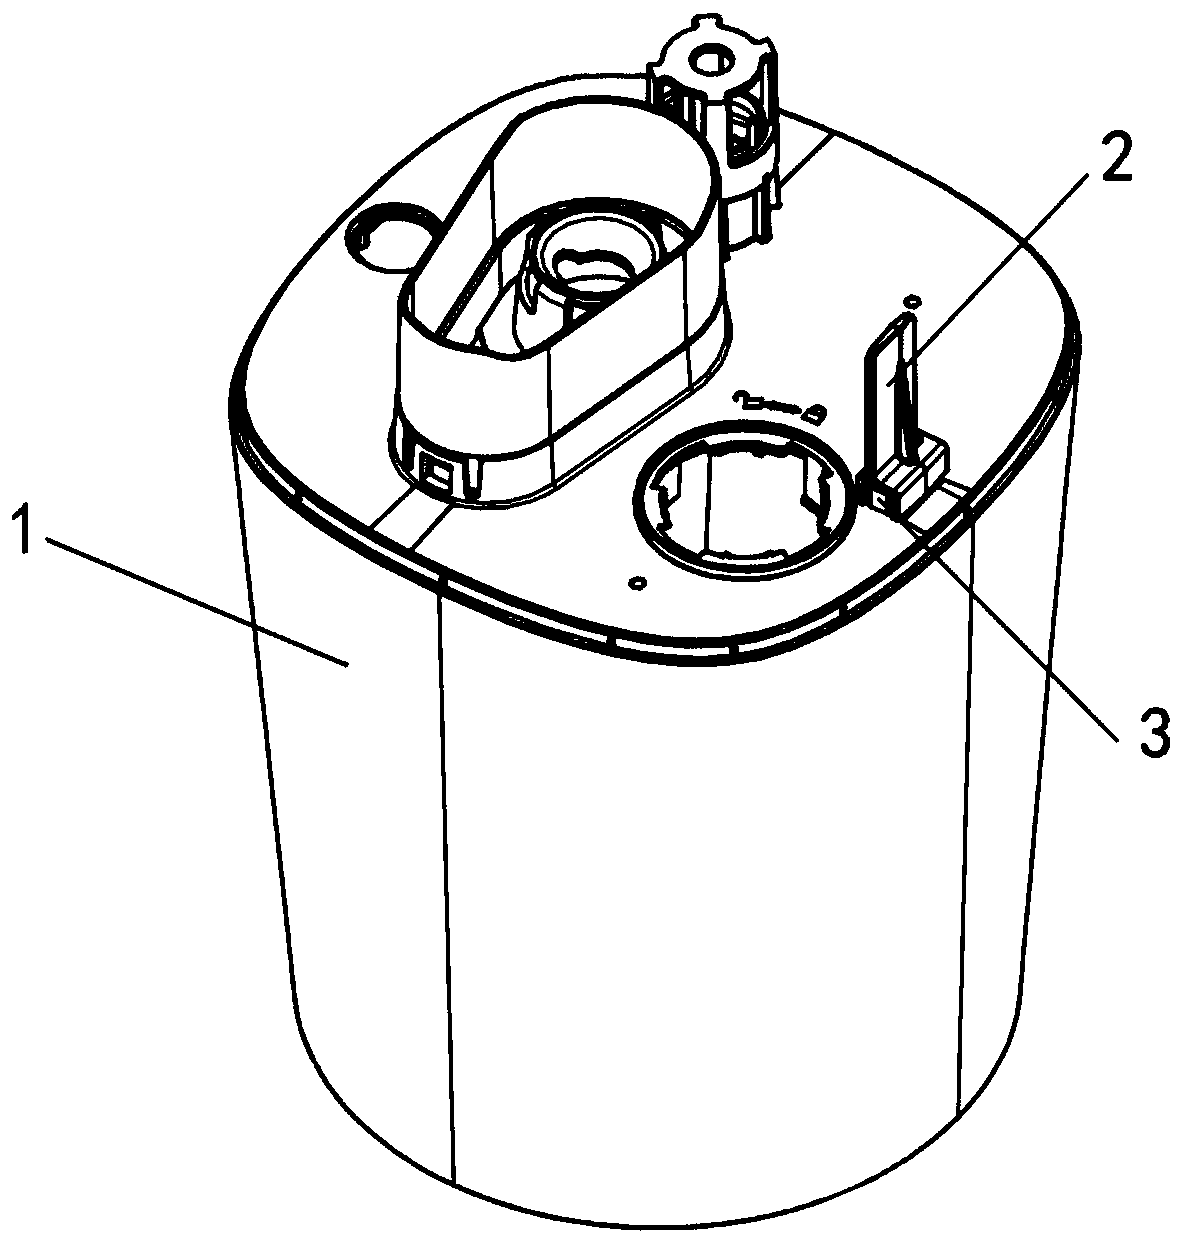 Water tank assembly of humidifier, and humidifier